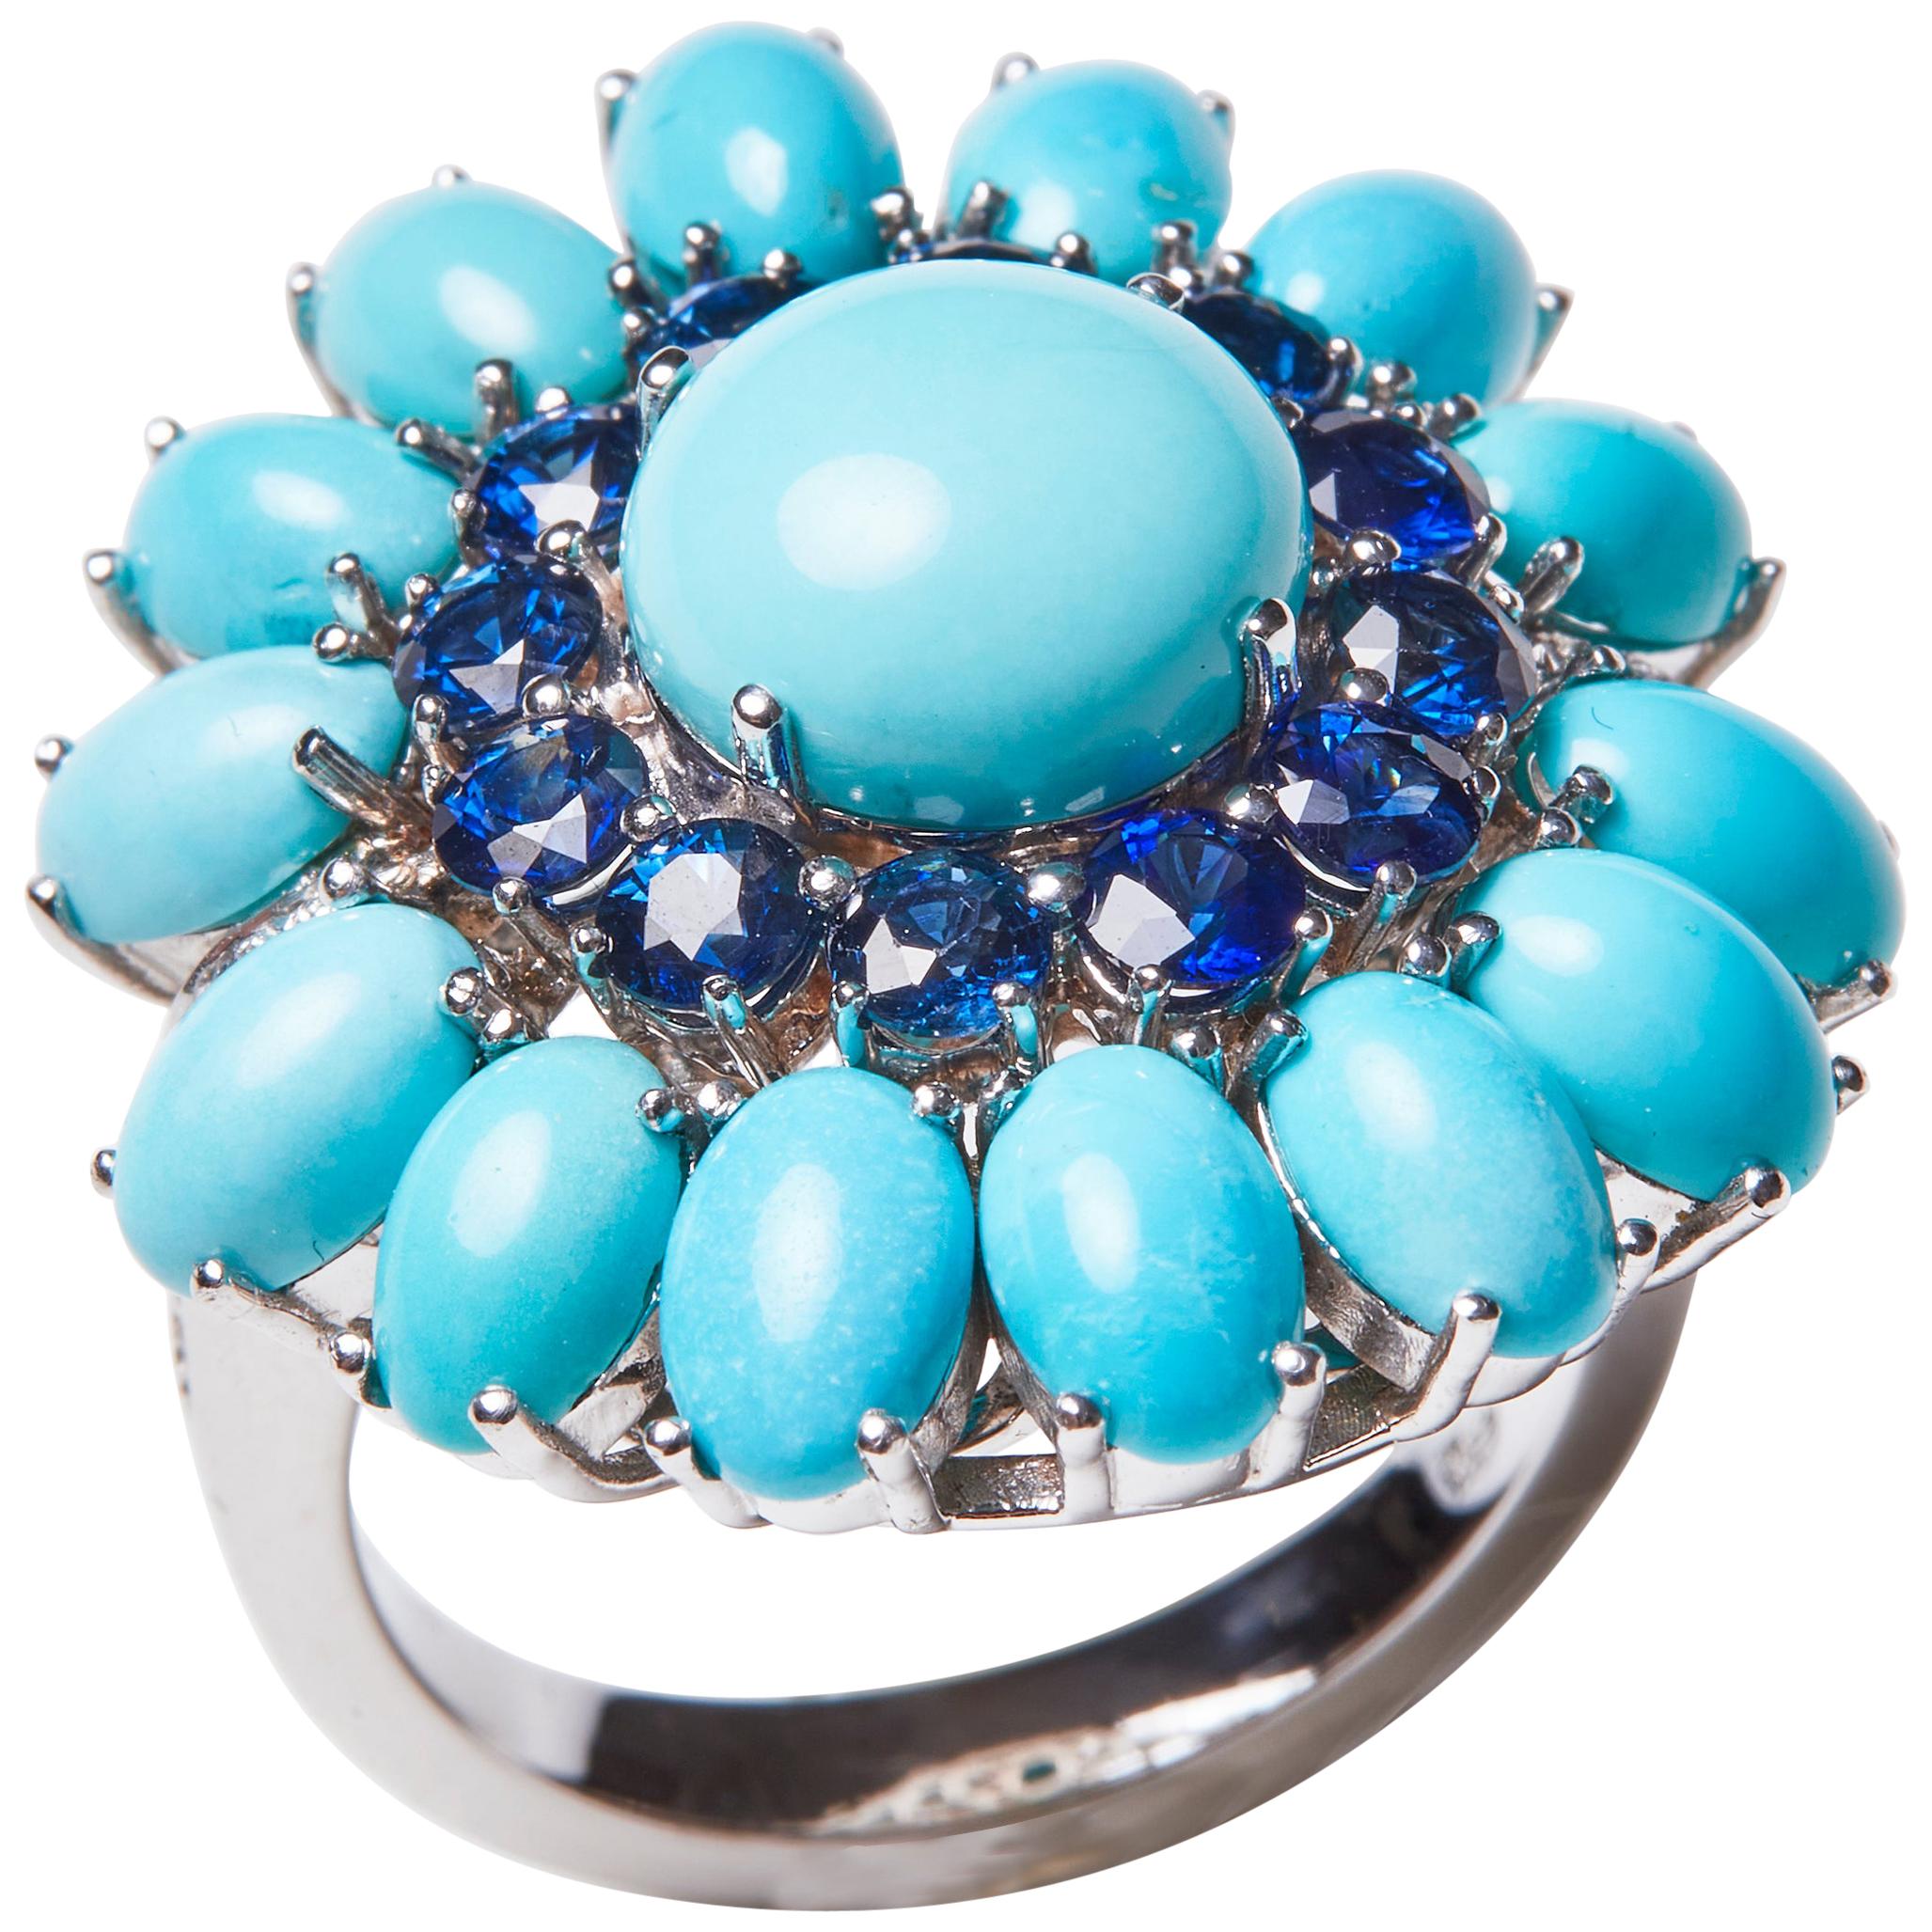 18 Karat White Gold Diamond Sapphire and Turquoise Cocktail Ring